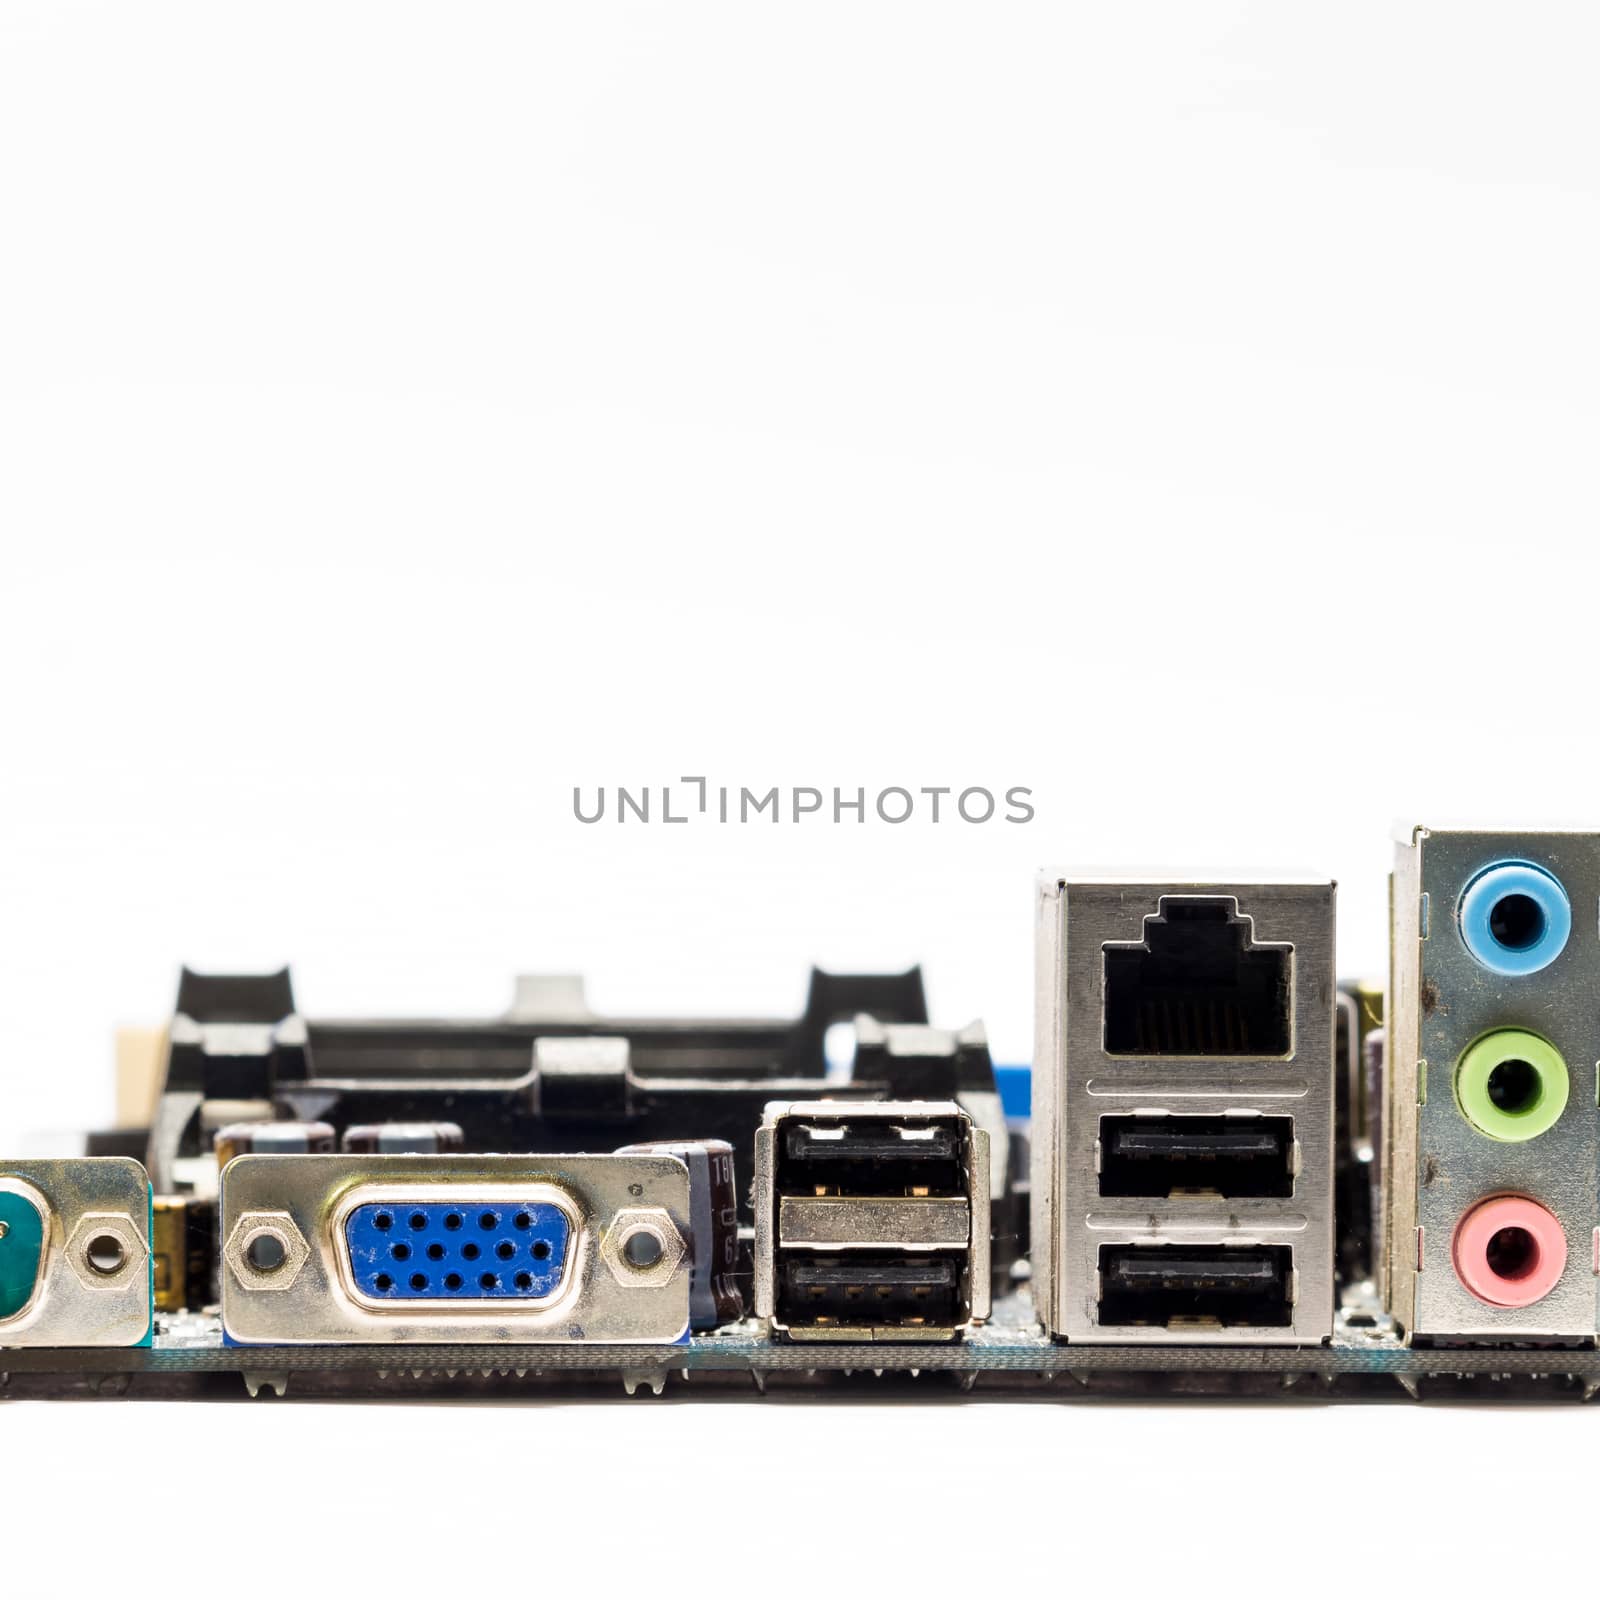 Connector of computer motherboard by alanstix64